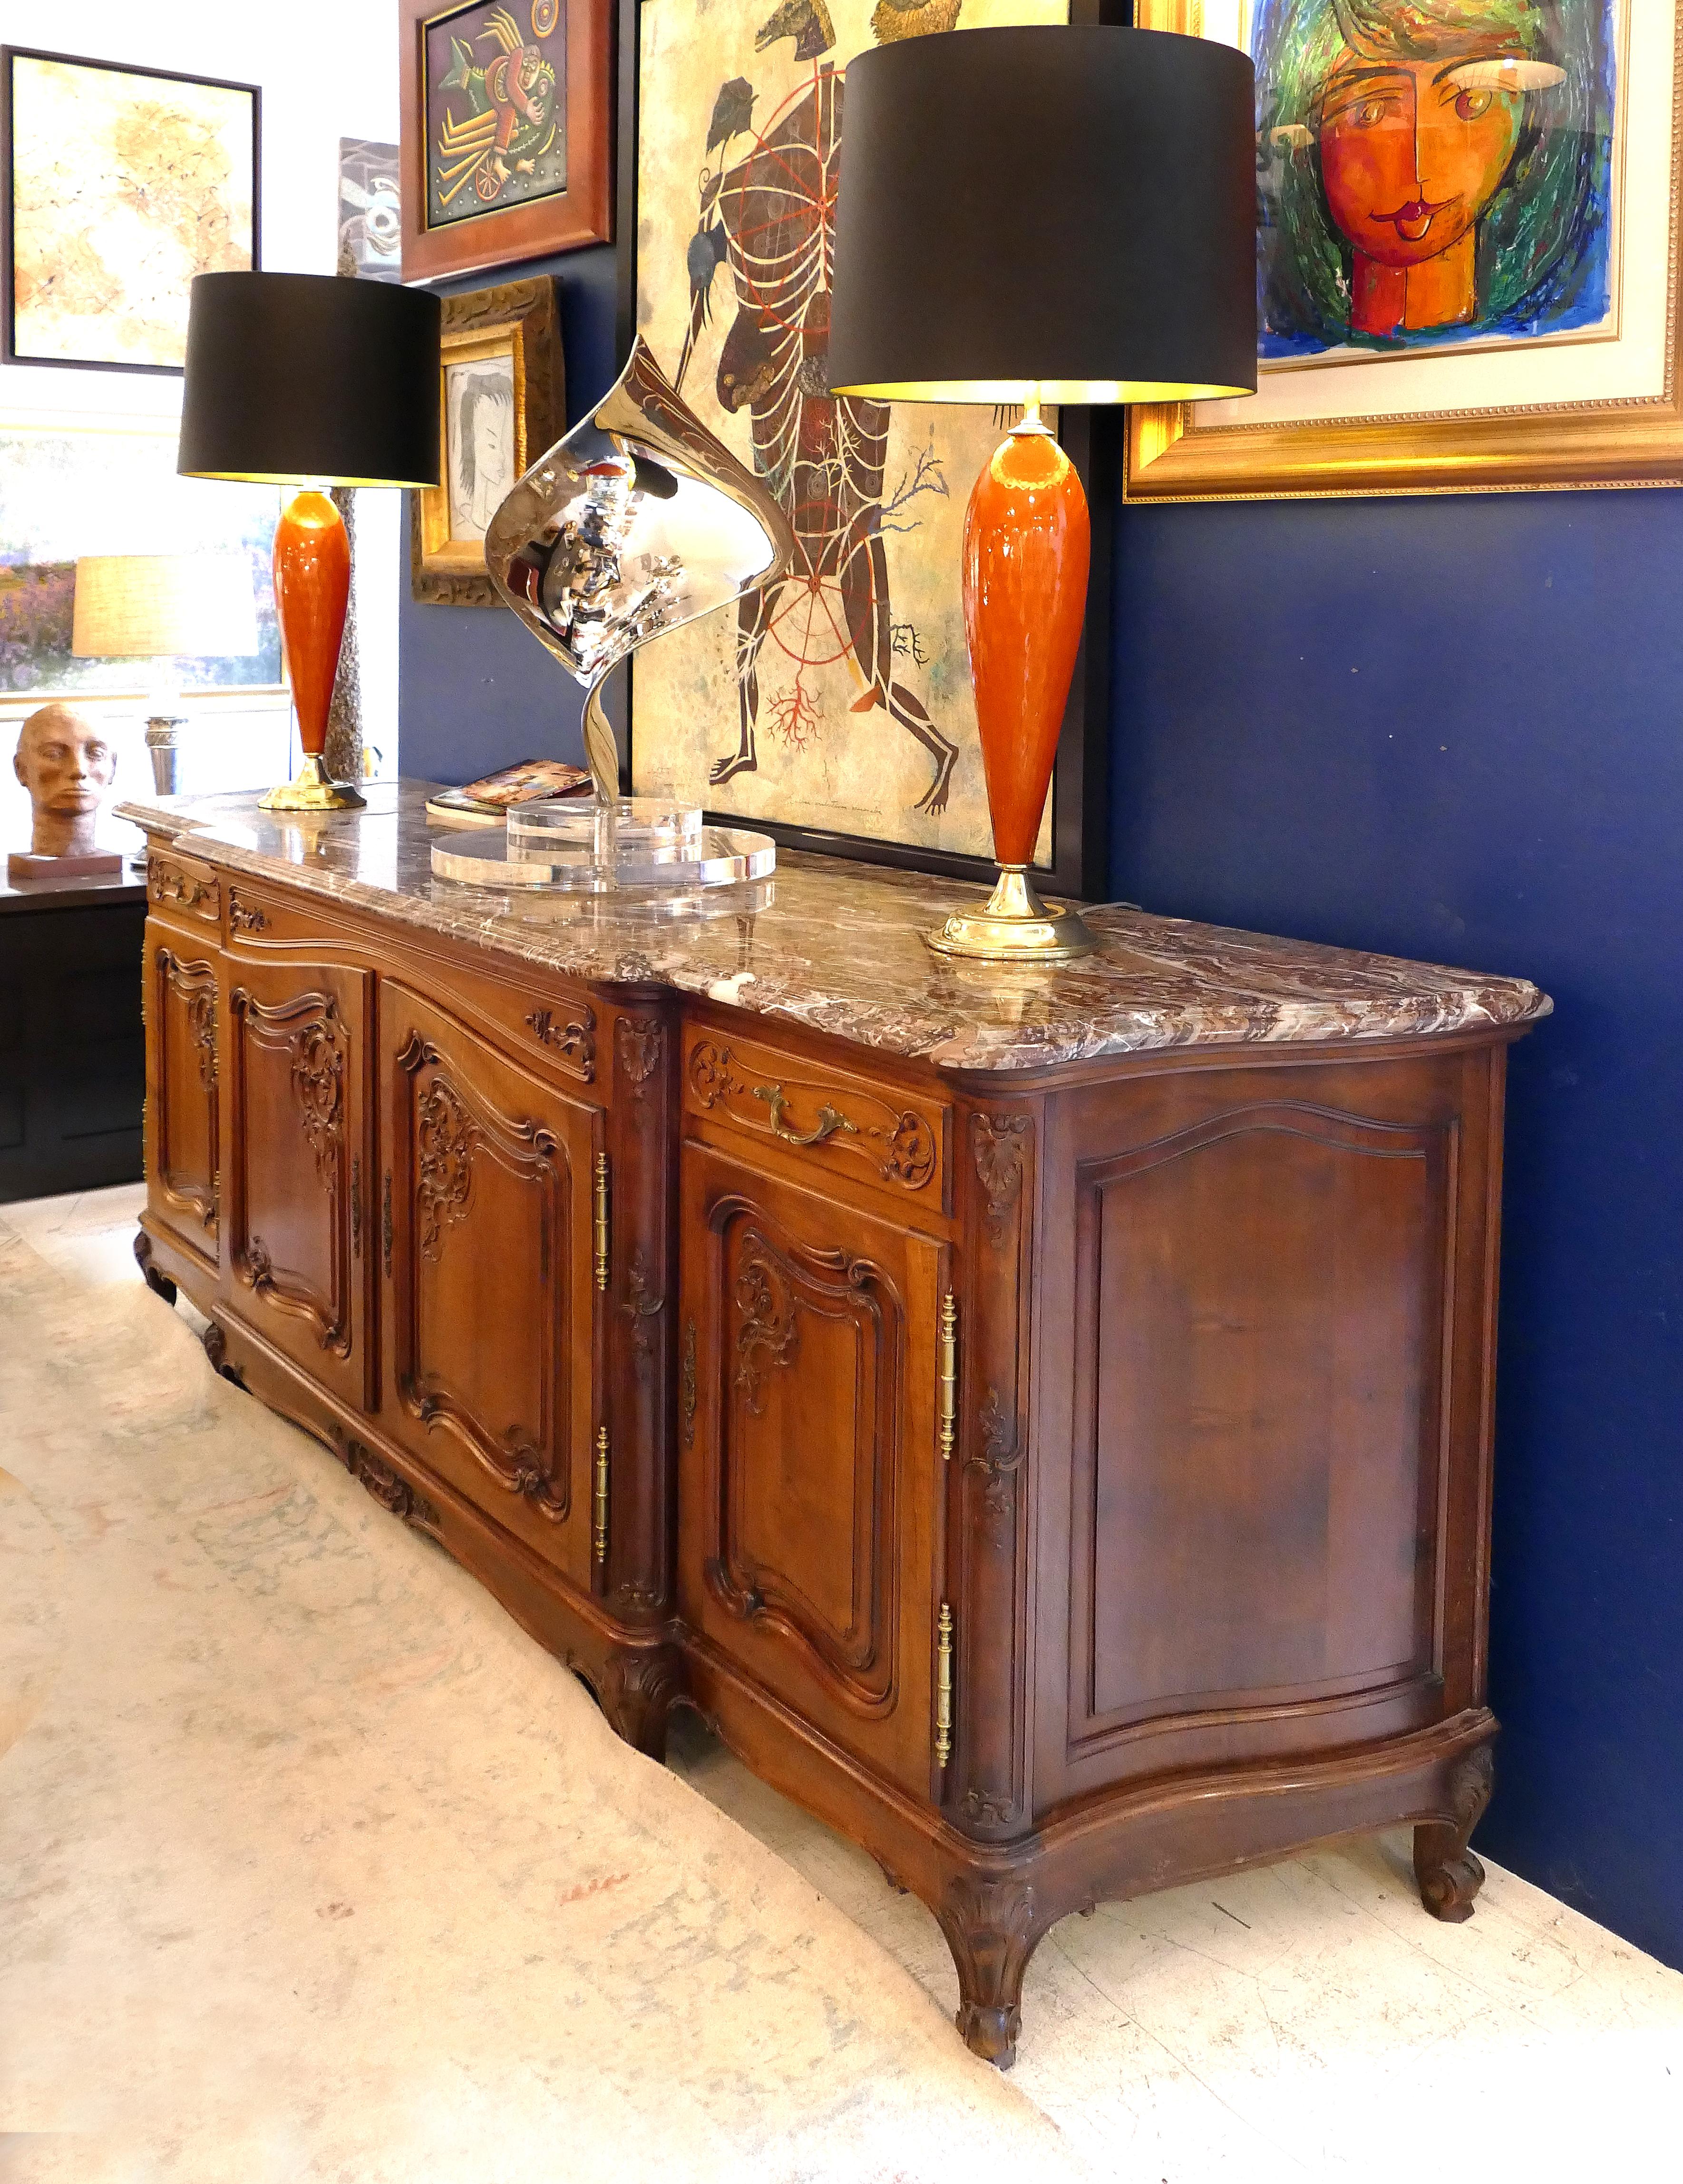 French Provincial marble-top buffet sideboard in carved walnut

Offered for sale is an impressive and substantial French provincial carved walnut buffet sideboard with an ornate marble top. This large, beautifully carved cabinet provides a great